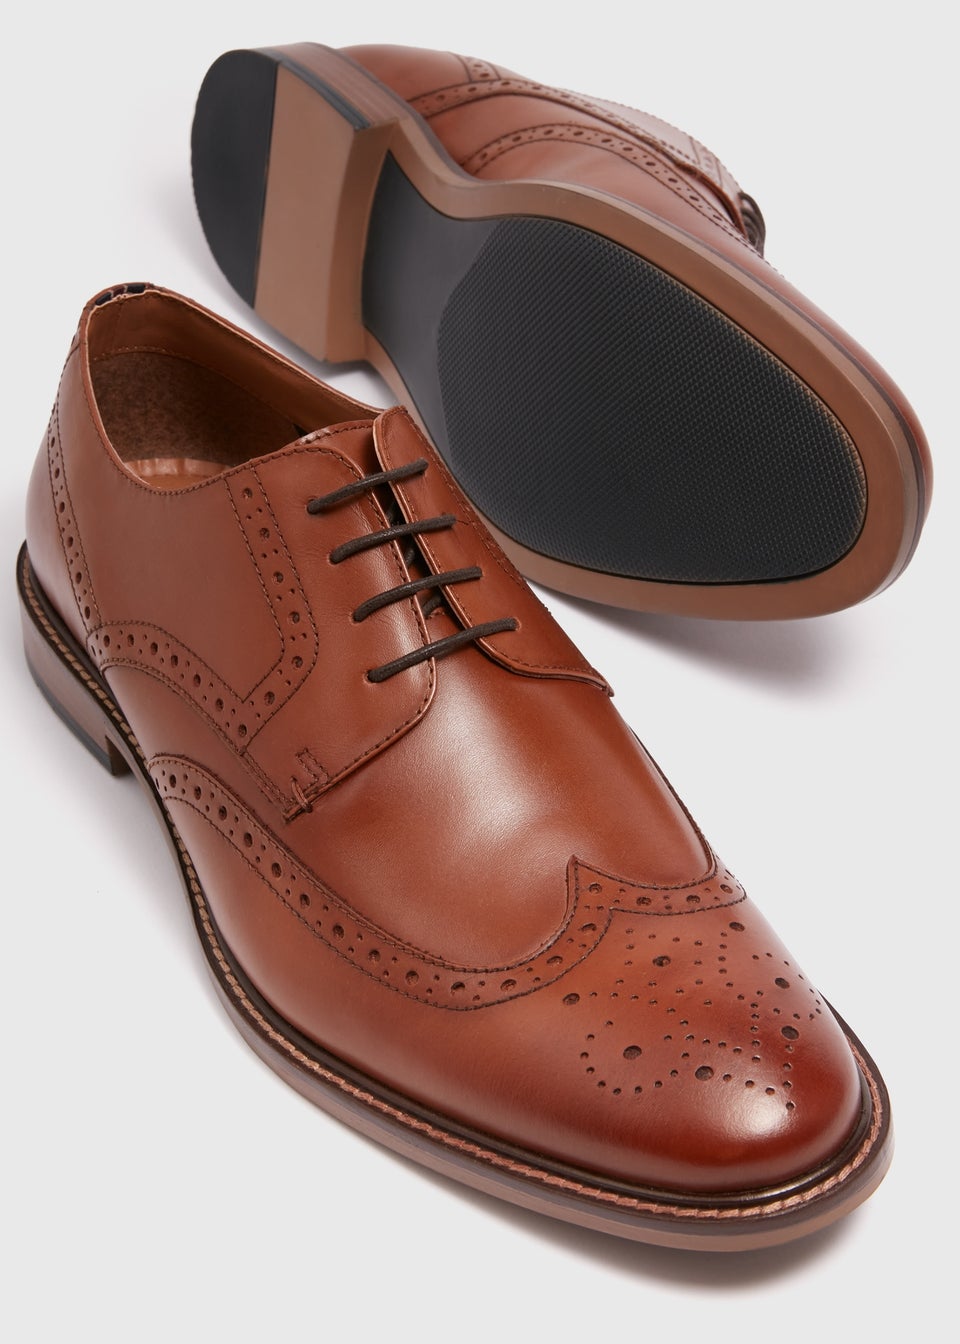 Tan Leather Brogue Shoes